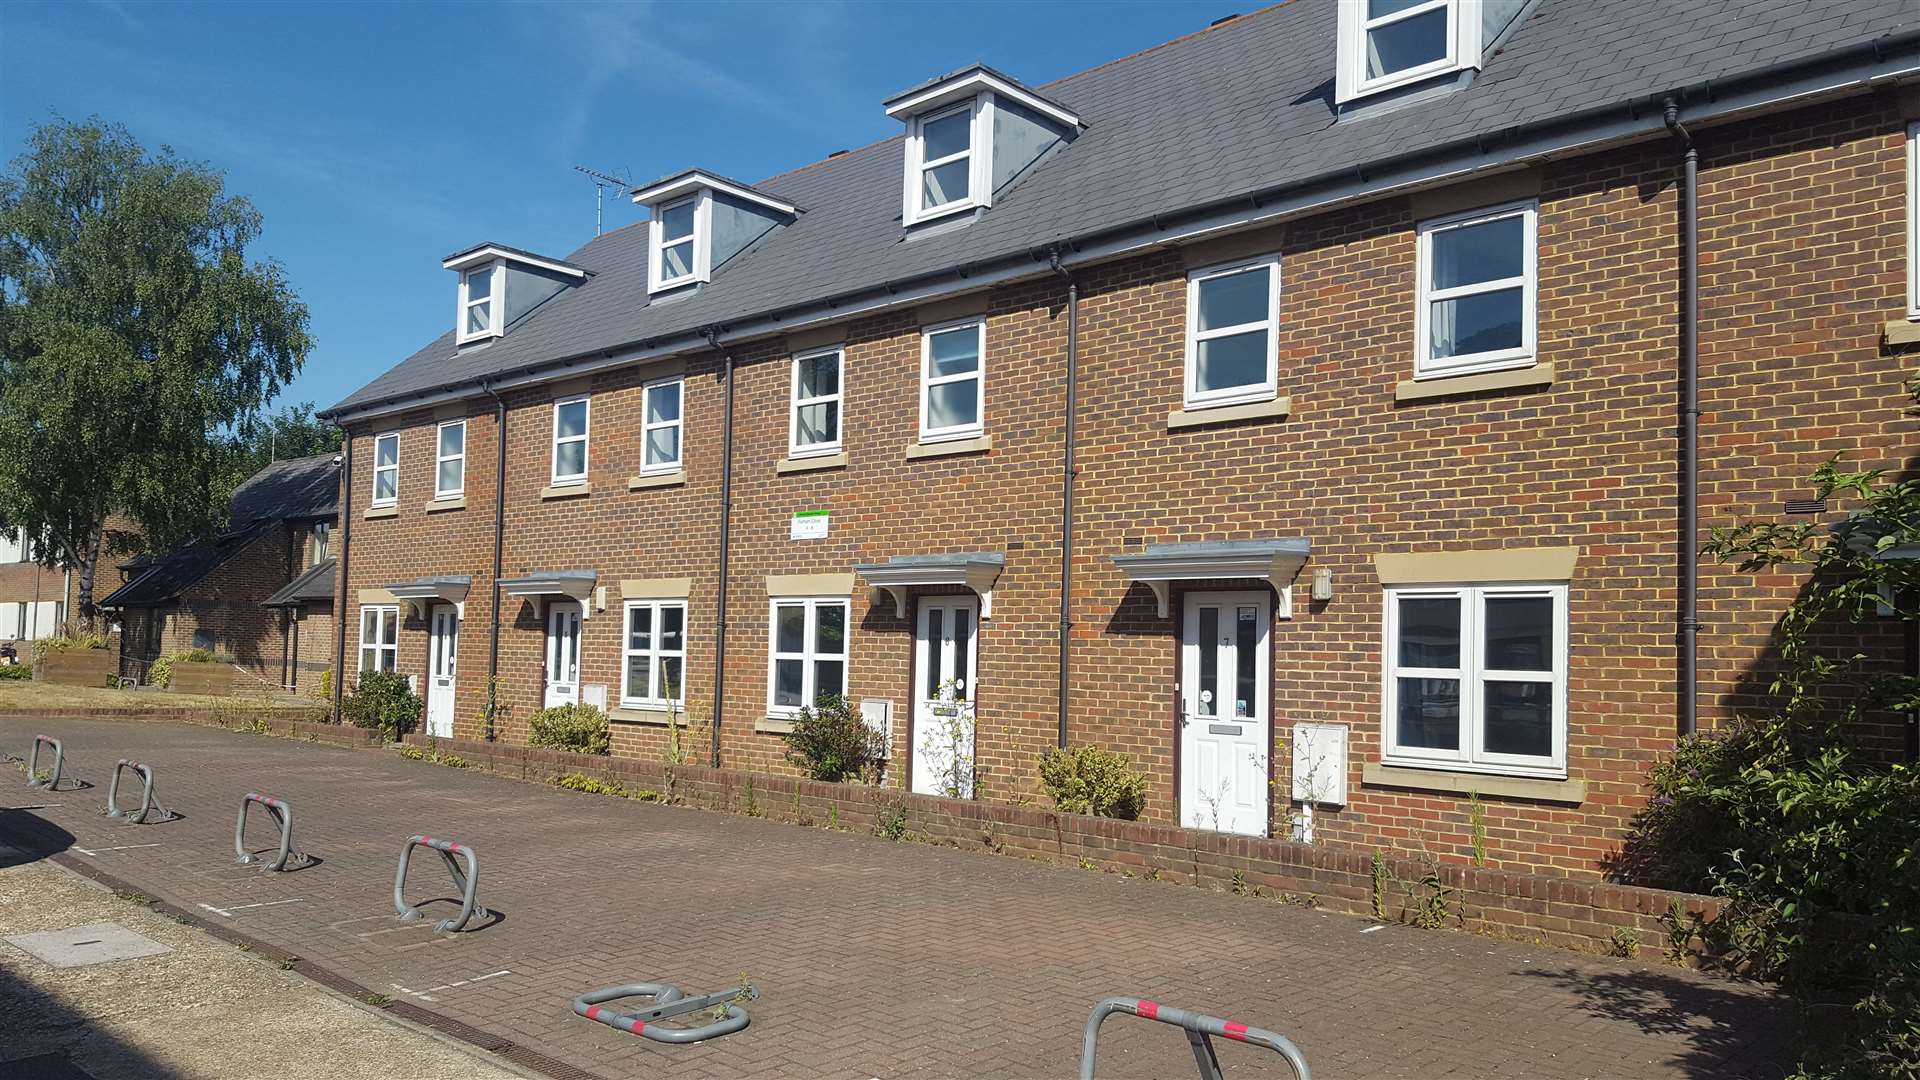 Some of the homes which are to become council houses as part of the scheme